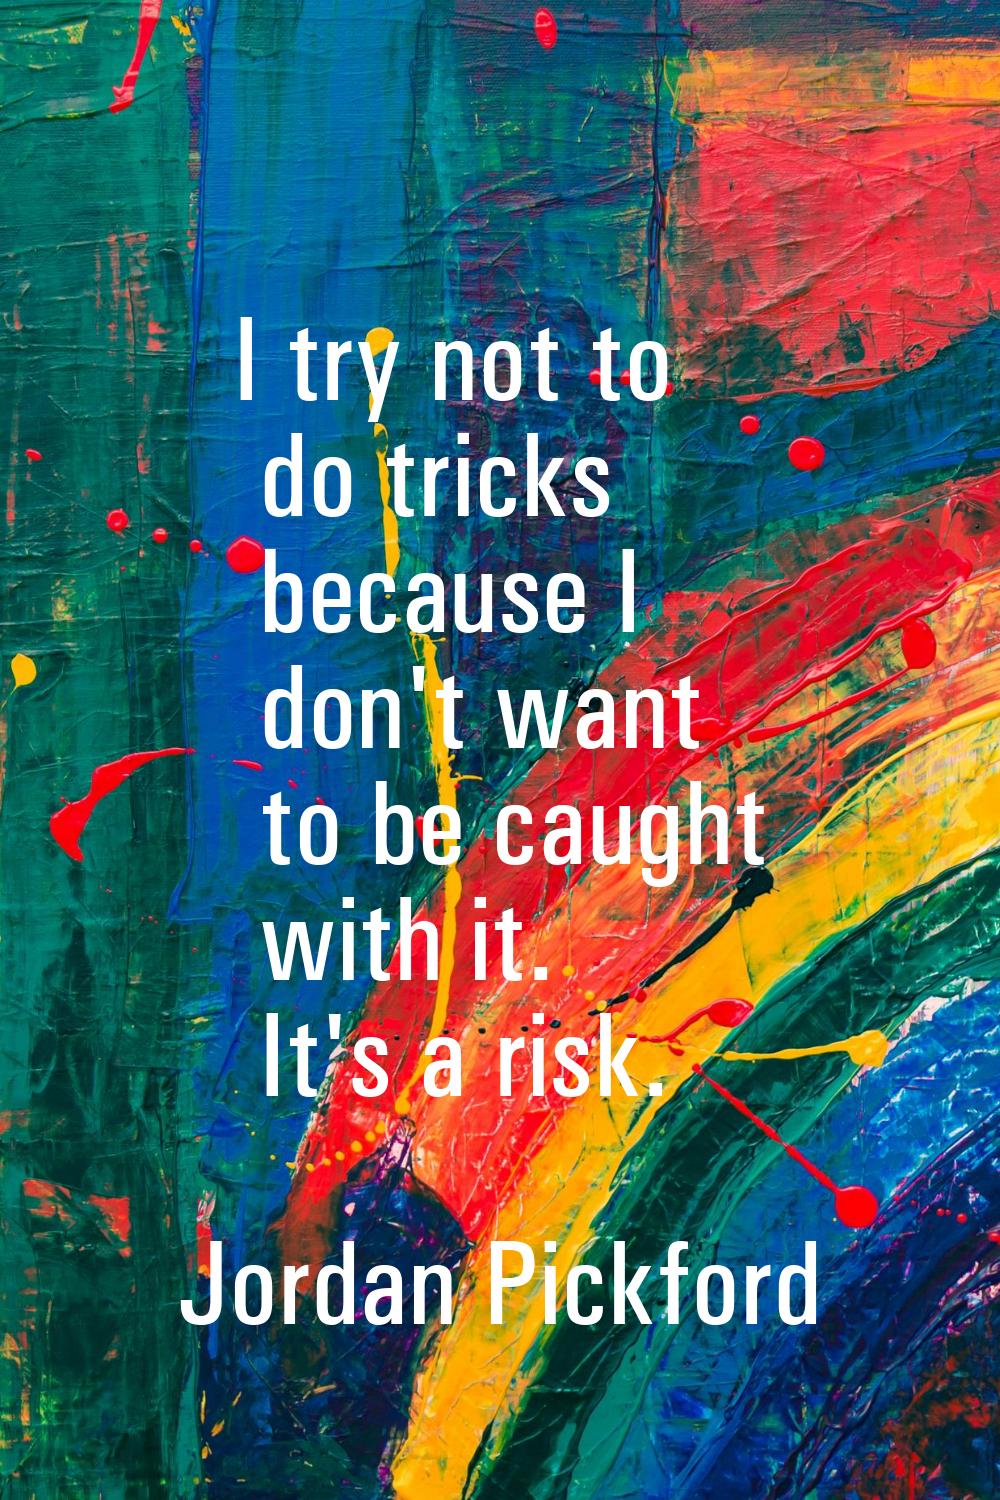 I try not to do tricks because I don't want to be caught with it. It's a risk.